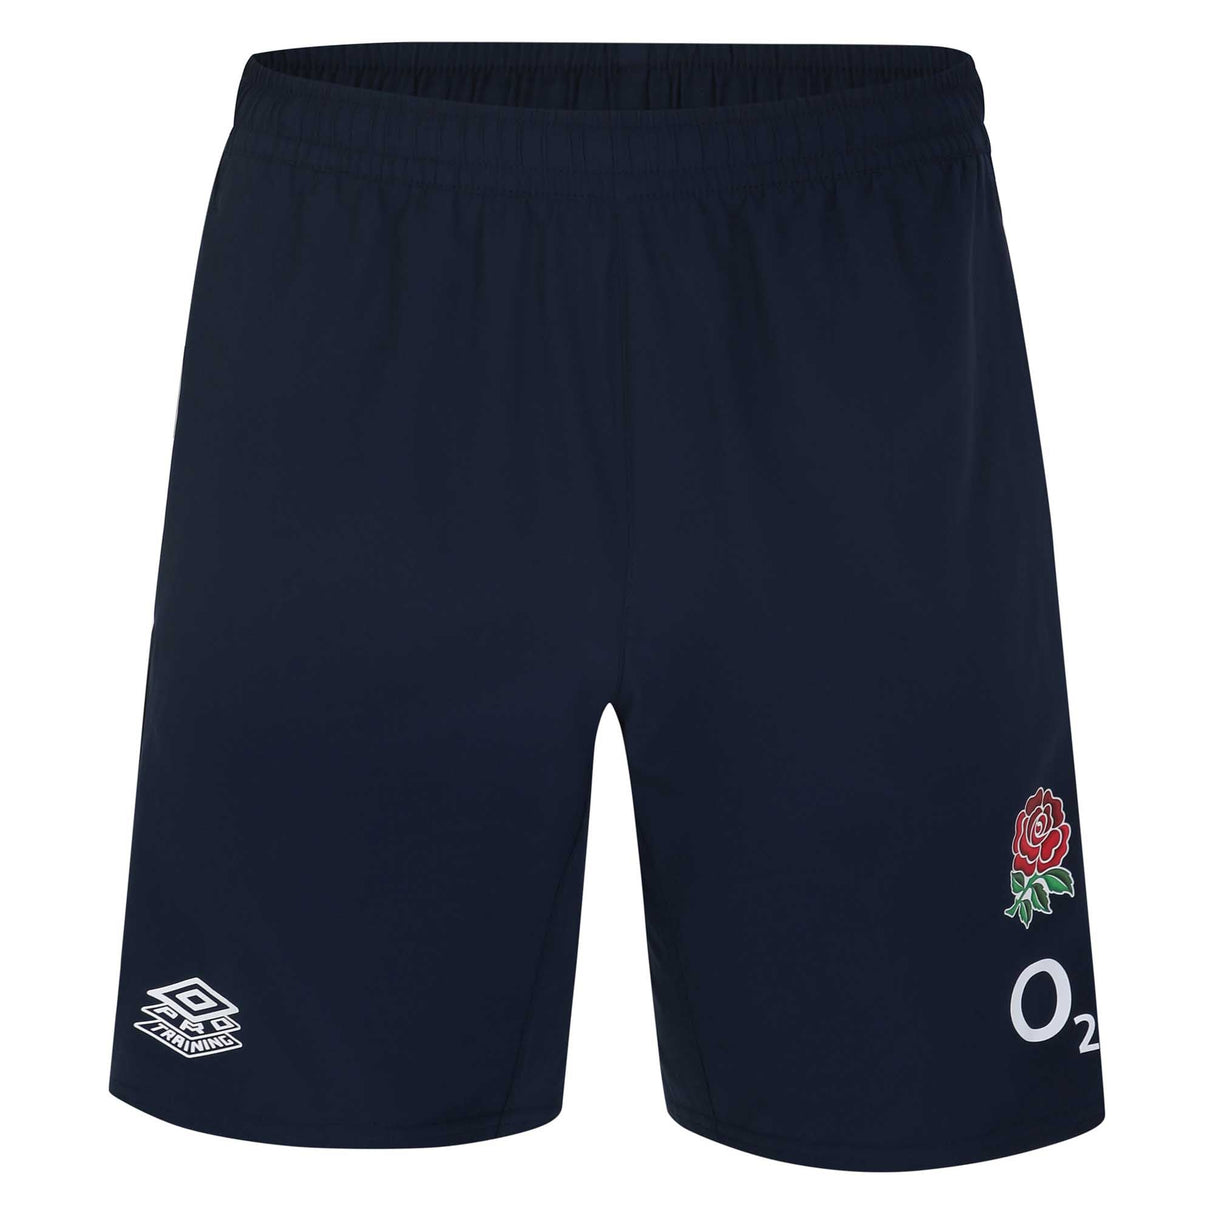 Umbro Junior England Rugby Gym Shorts 23/24 - Navy |Kids Shorts | Umbro RFU | Absolute Rugby